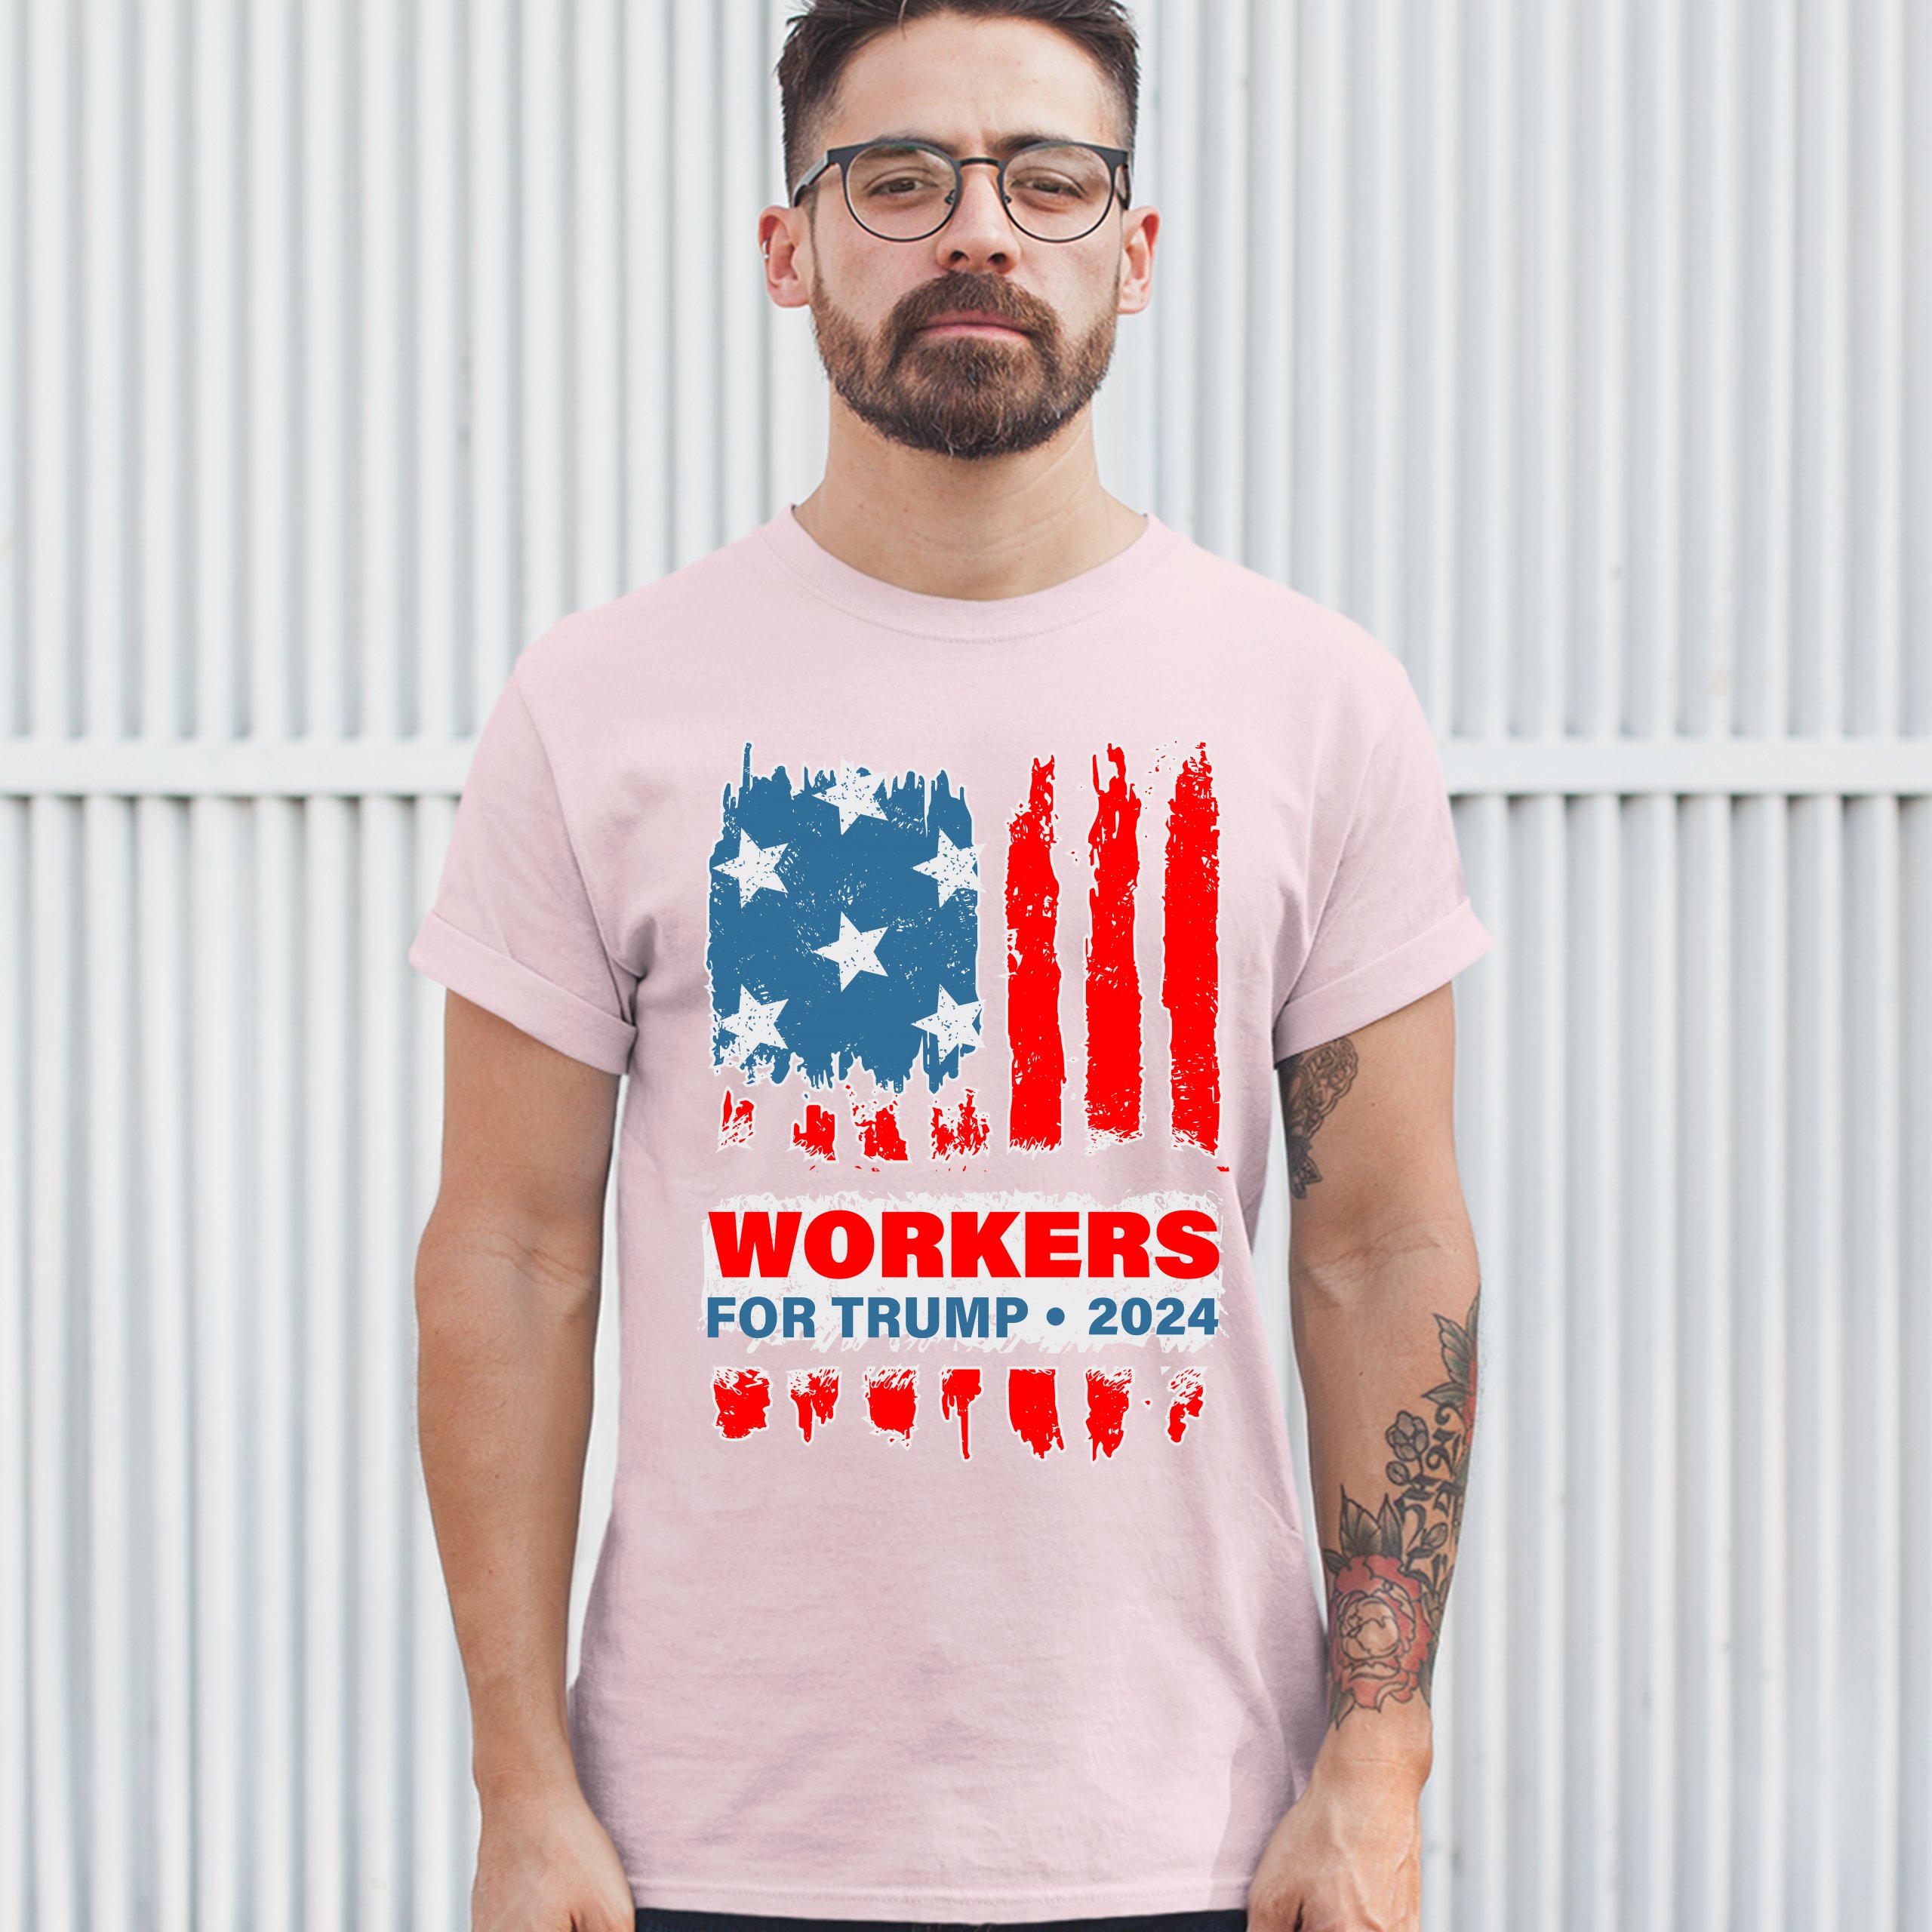 Workers for Trump 2024 Tshirt Conservative Vote Red Donald Trump Men's